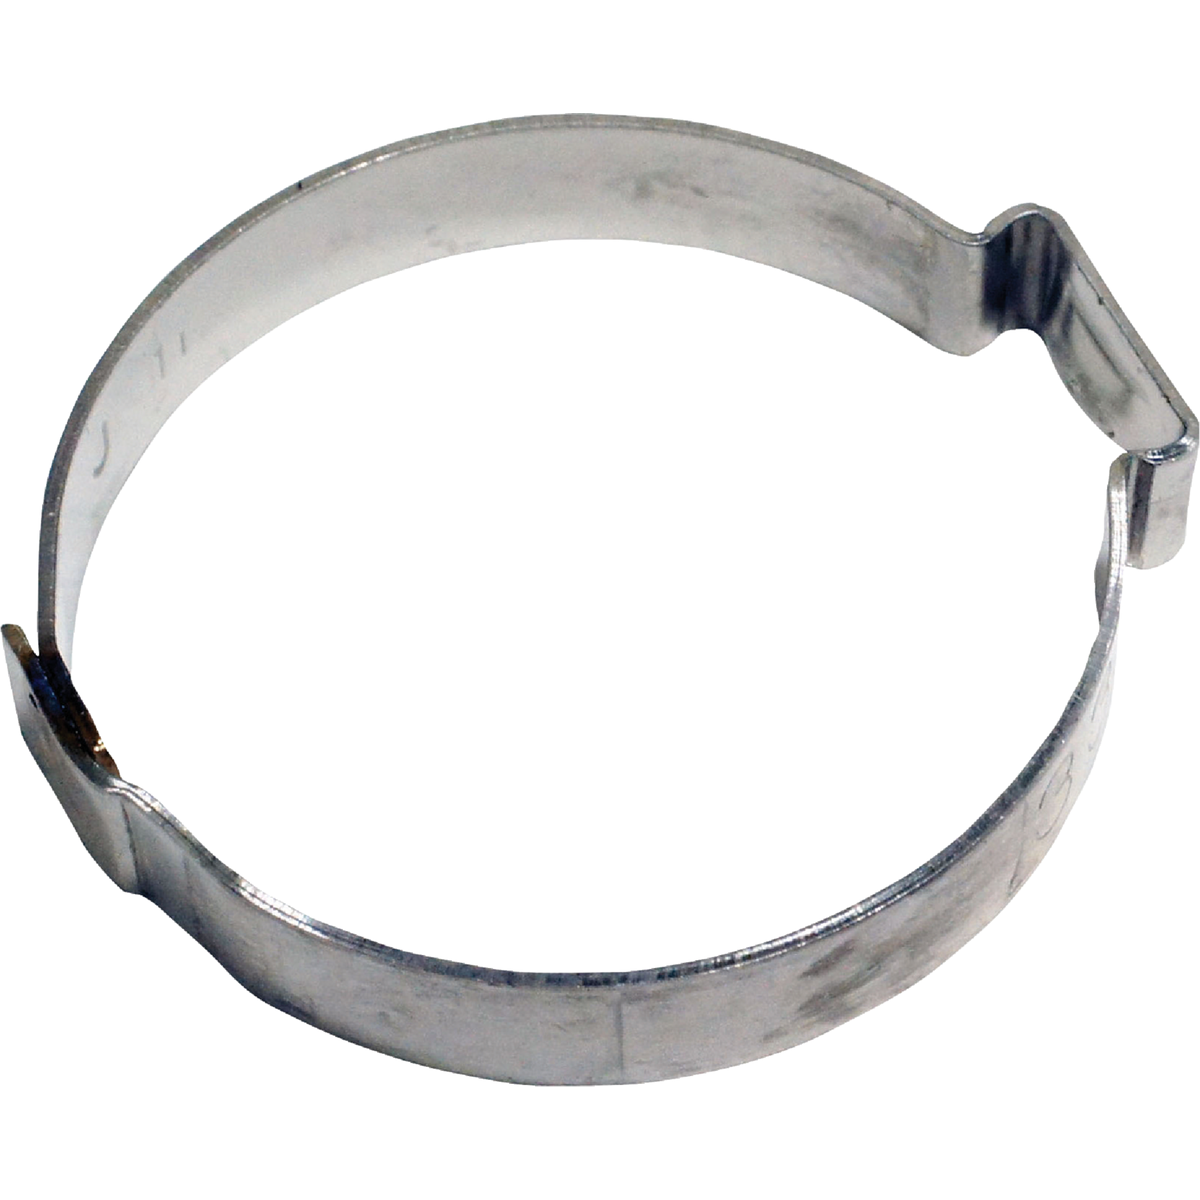 Stainless Steel Crimp Clamp